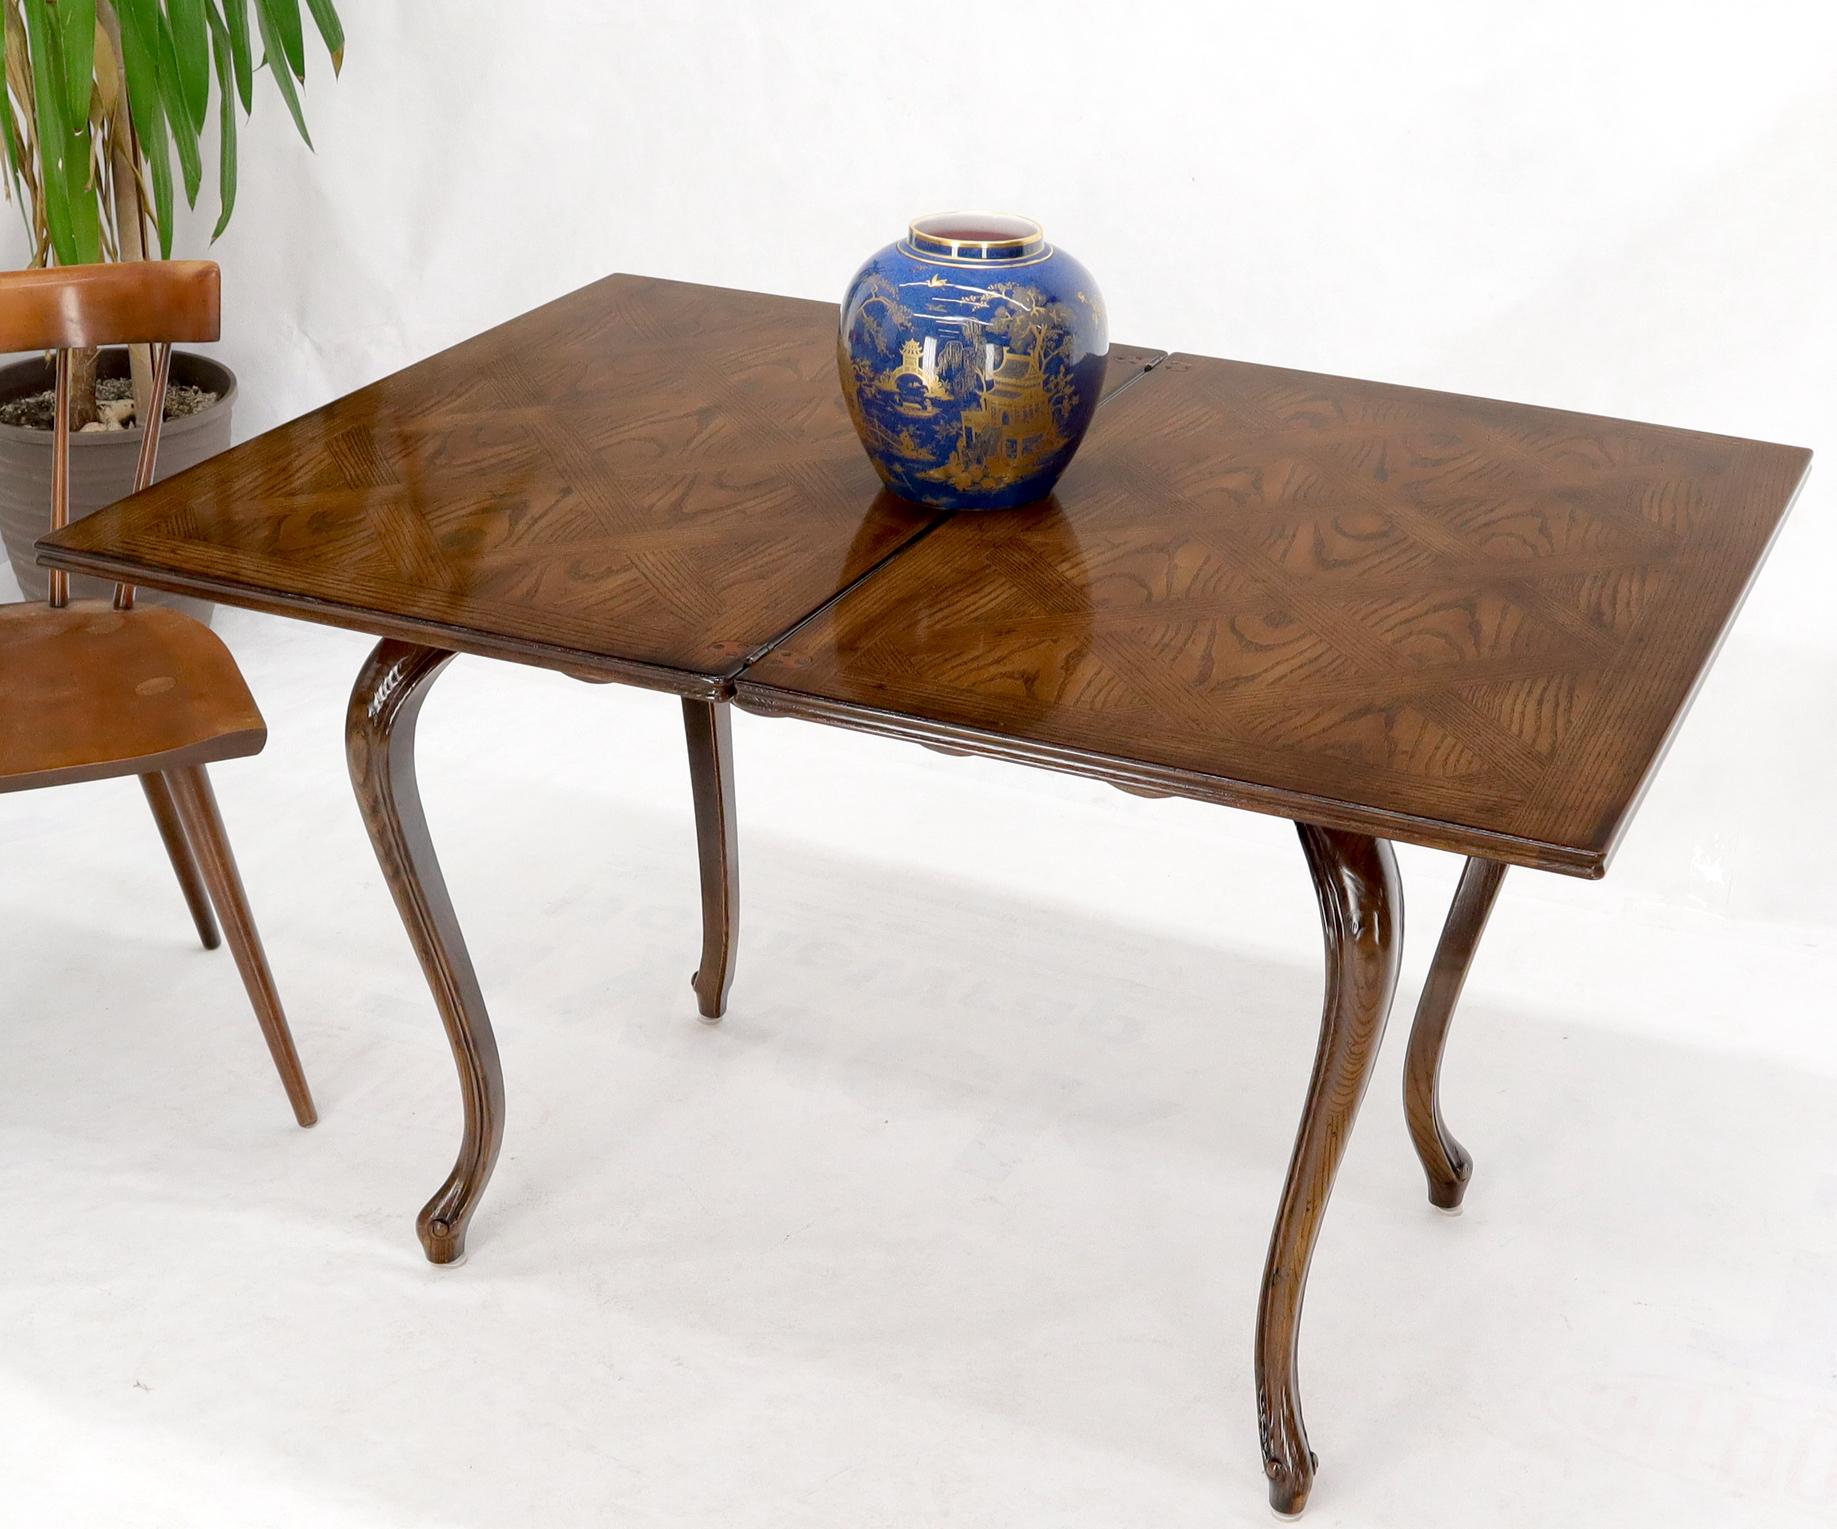 Beautiful Henredon flip top console table convertible into small dining table. When extended it measures 72